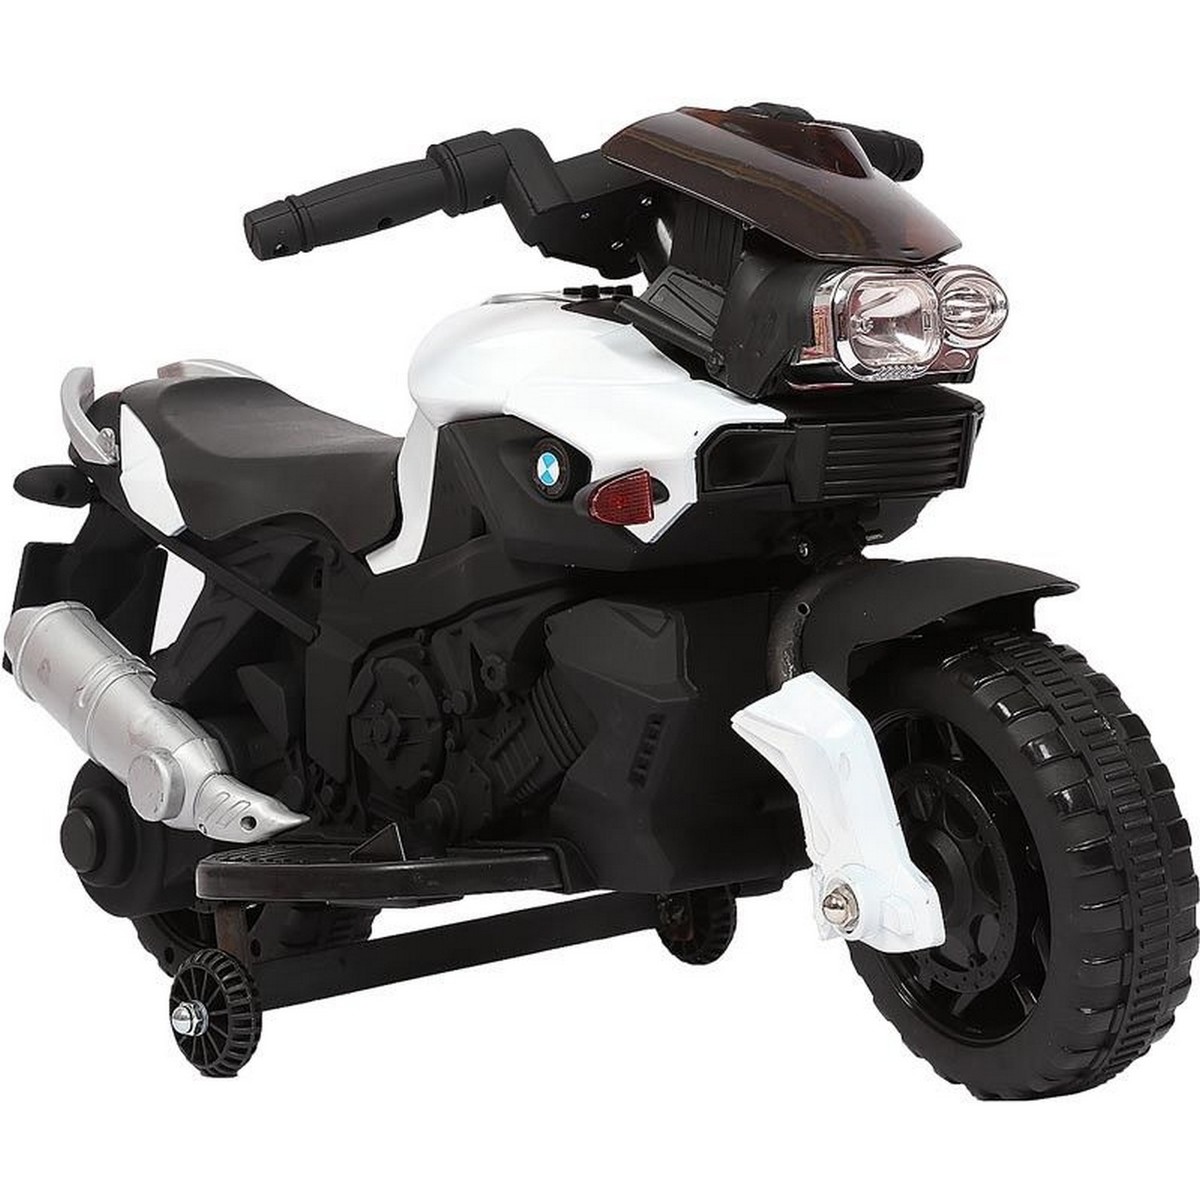 Kids Rid on Motor Bike Rechargeable CT-MB918 (Color May Vary)